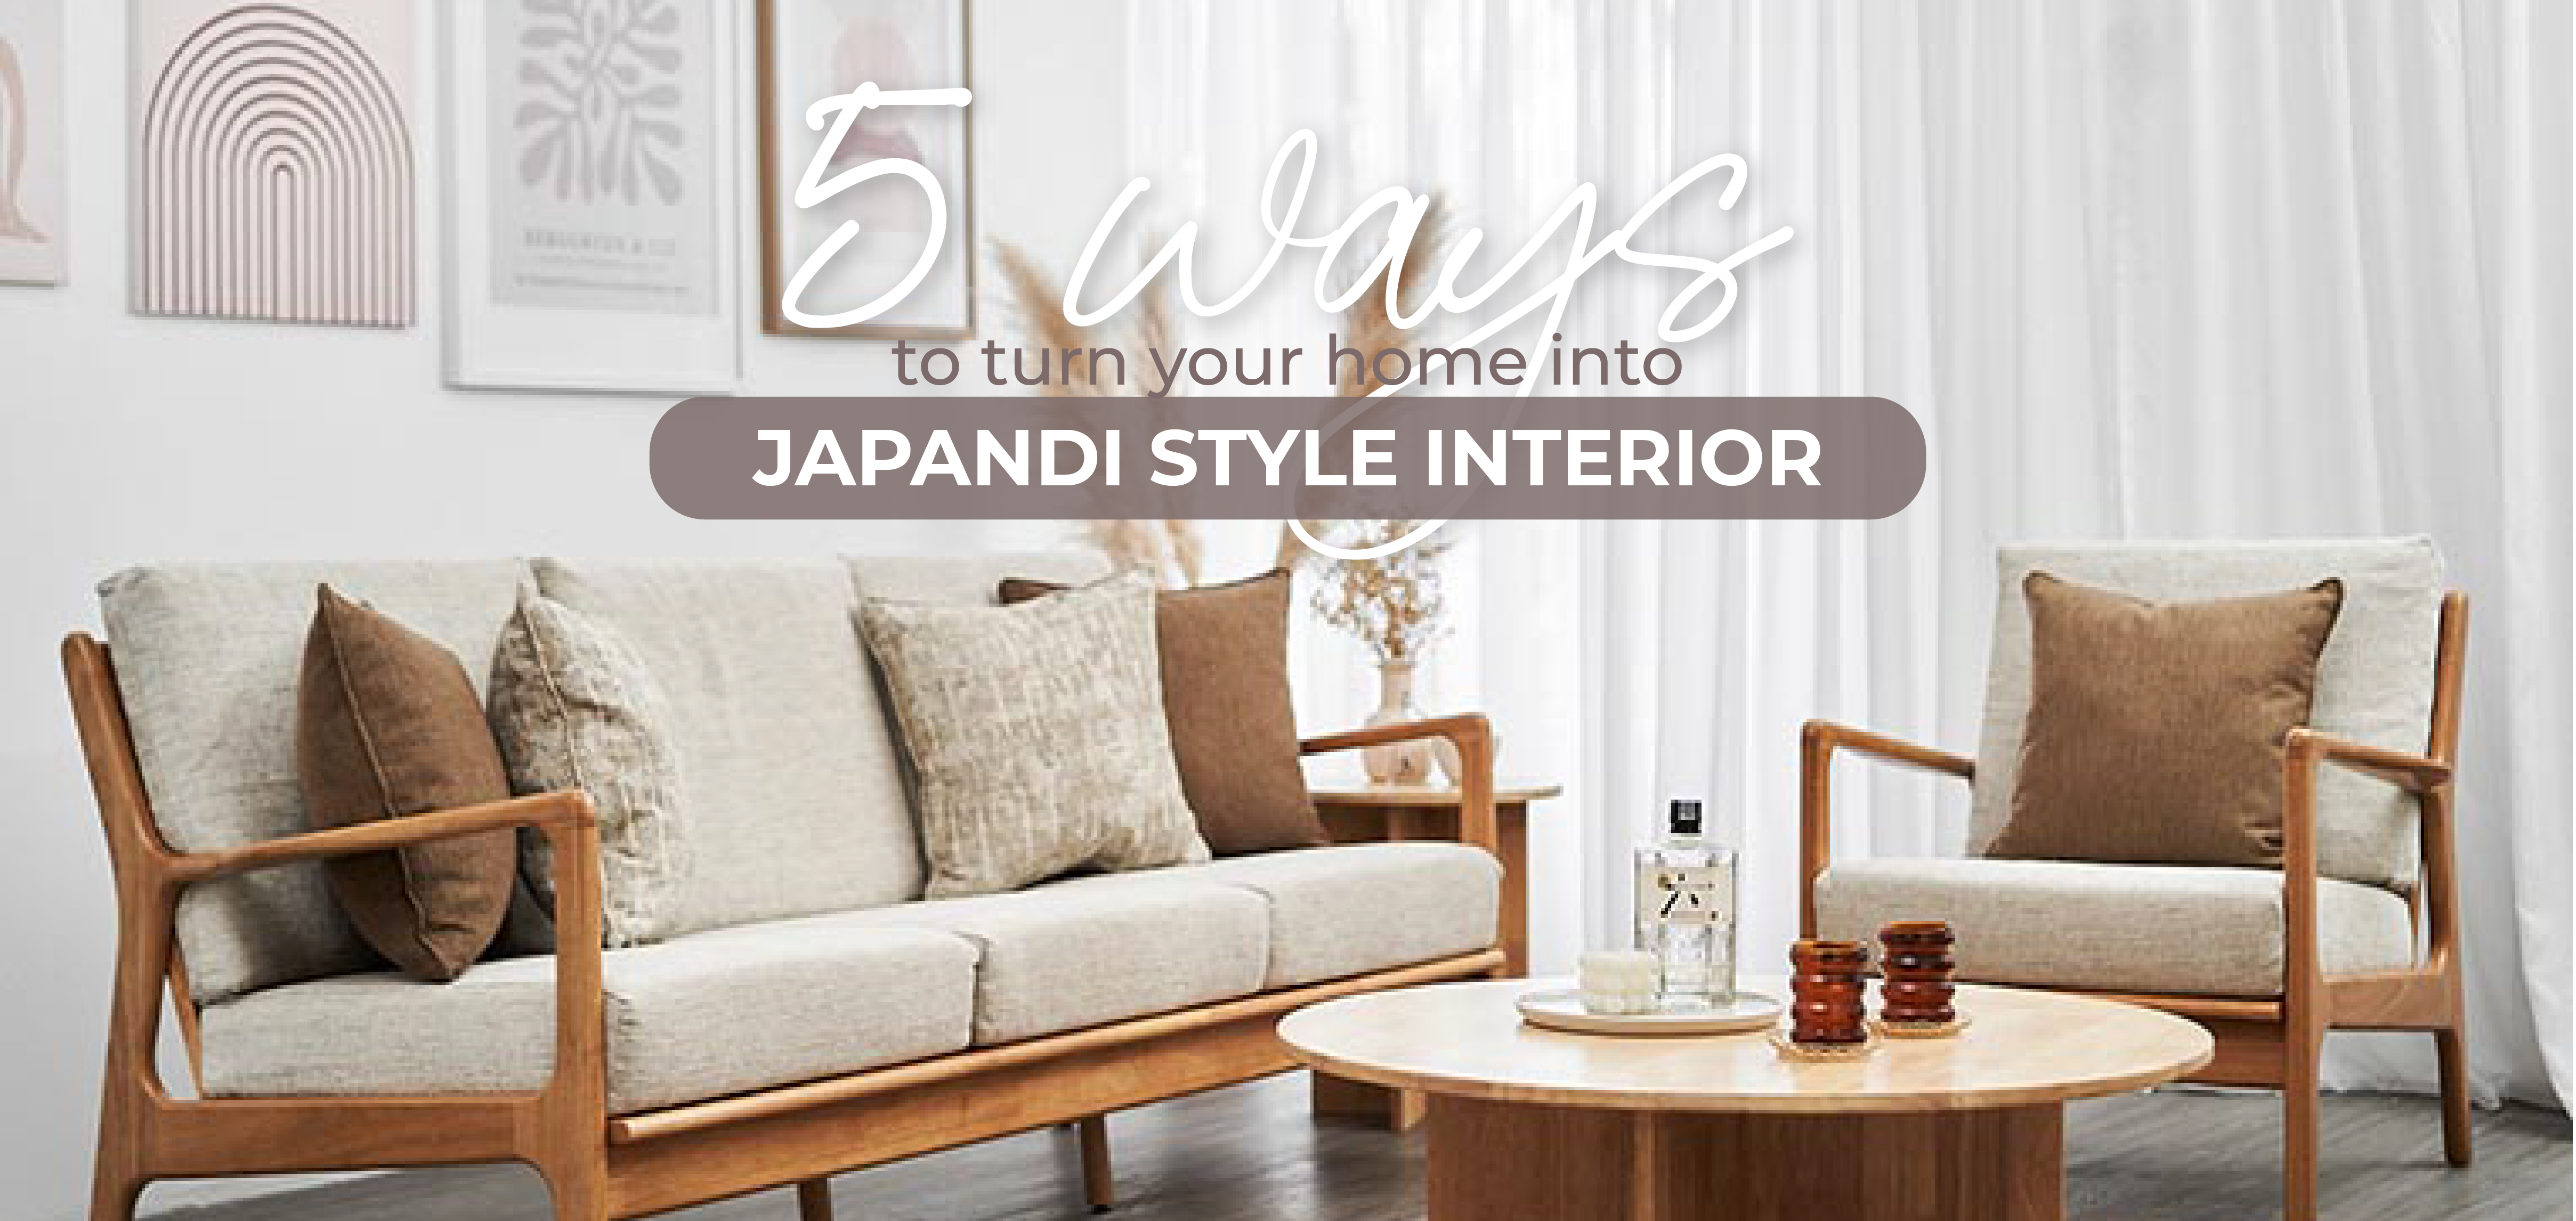 5 Ways to Turn Your Home into Japandi Style Interior